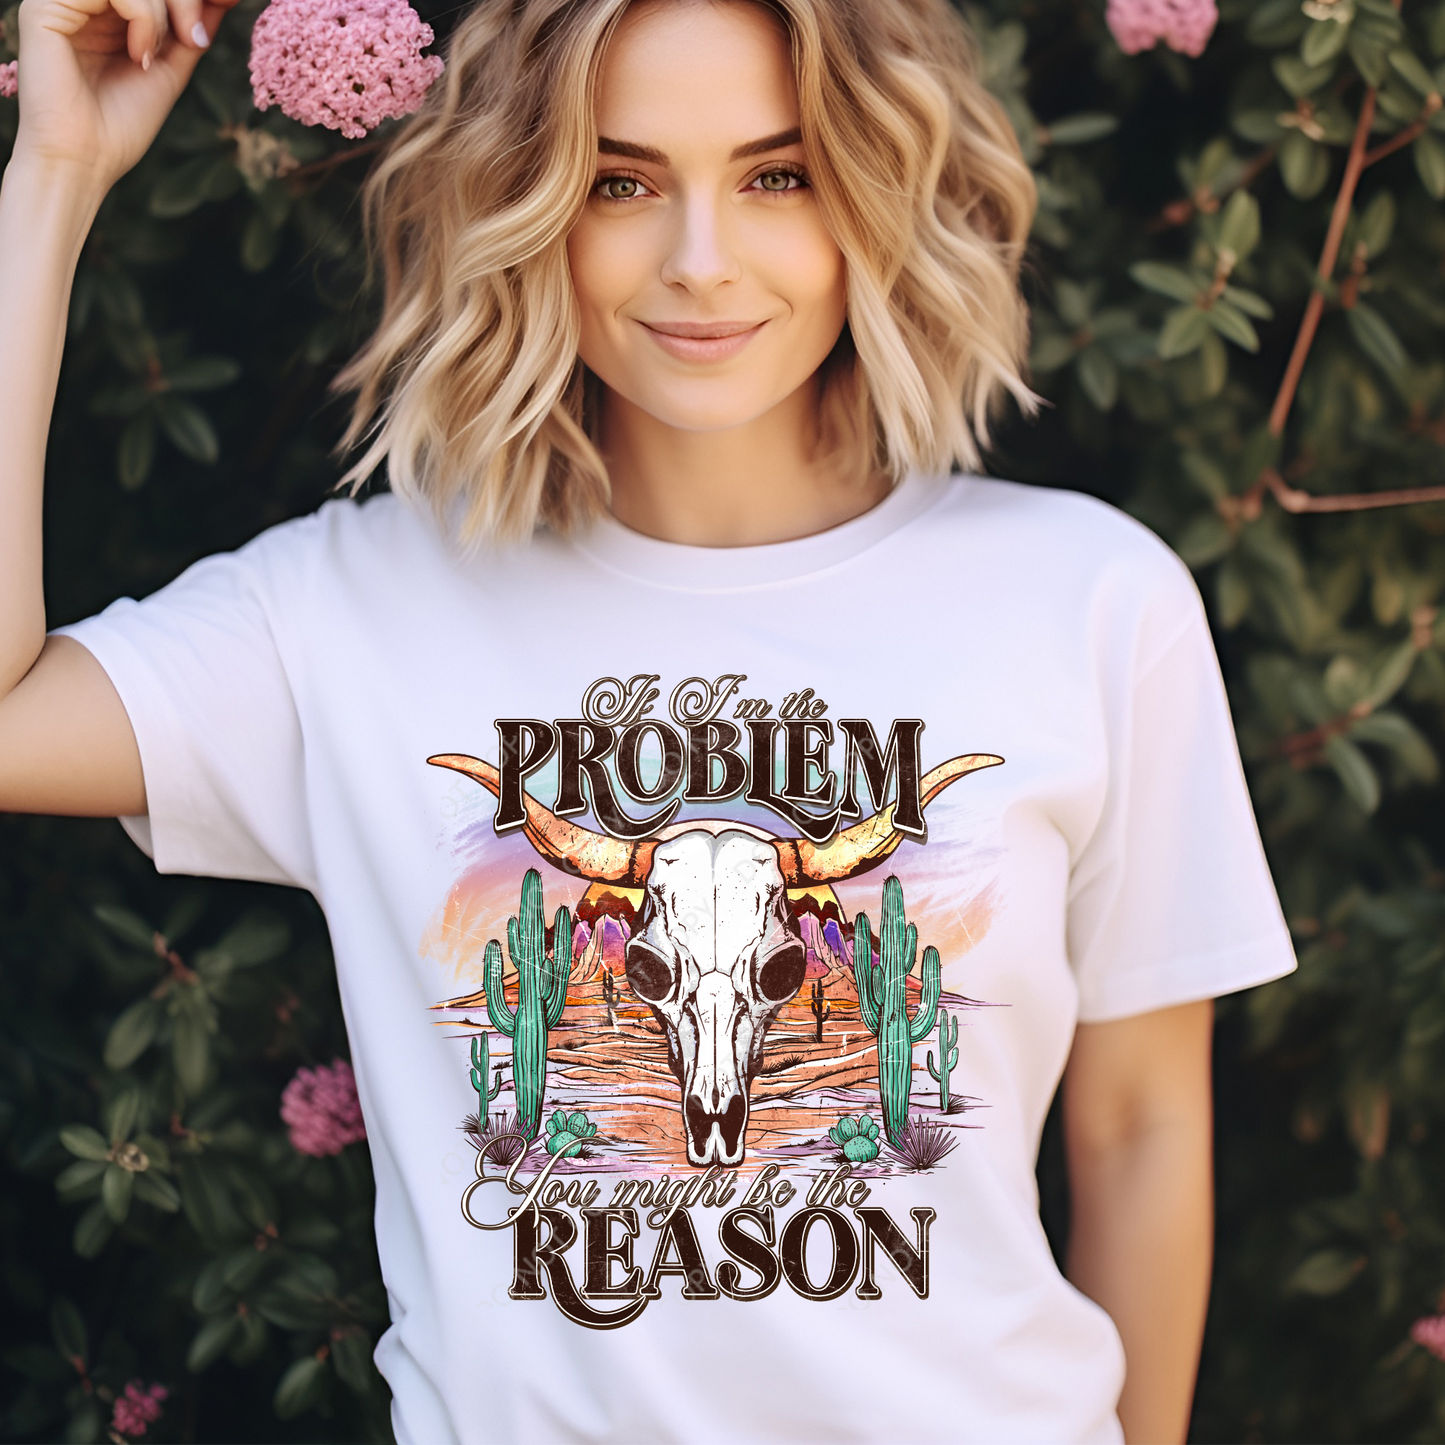 If I'm the problem, You might be the reason. Short sleeve Tshirt